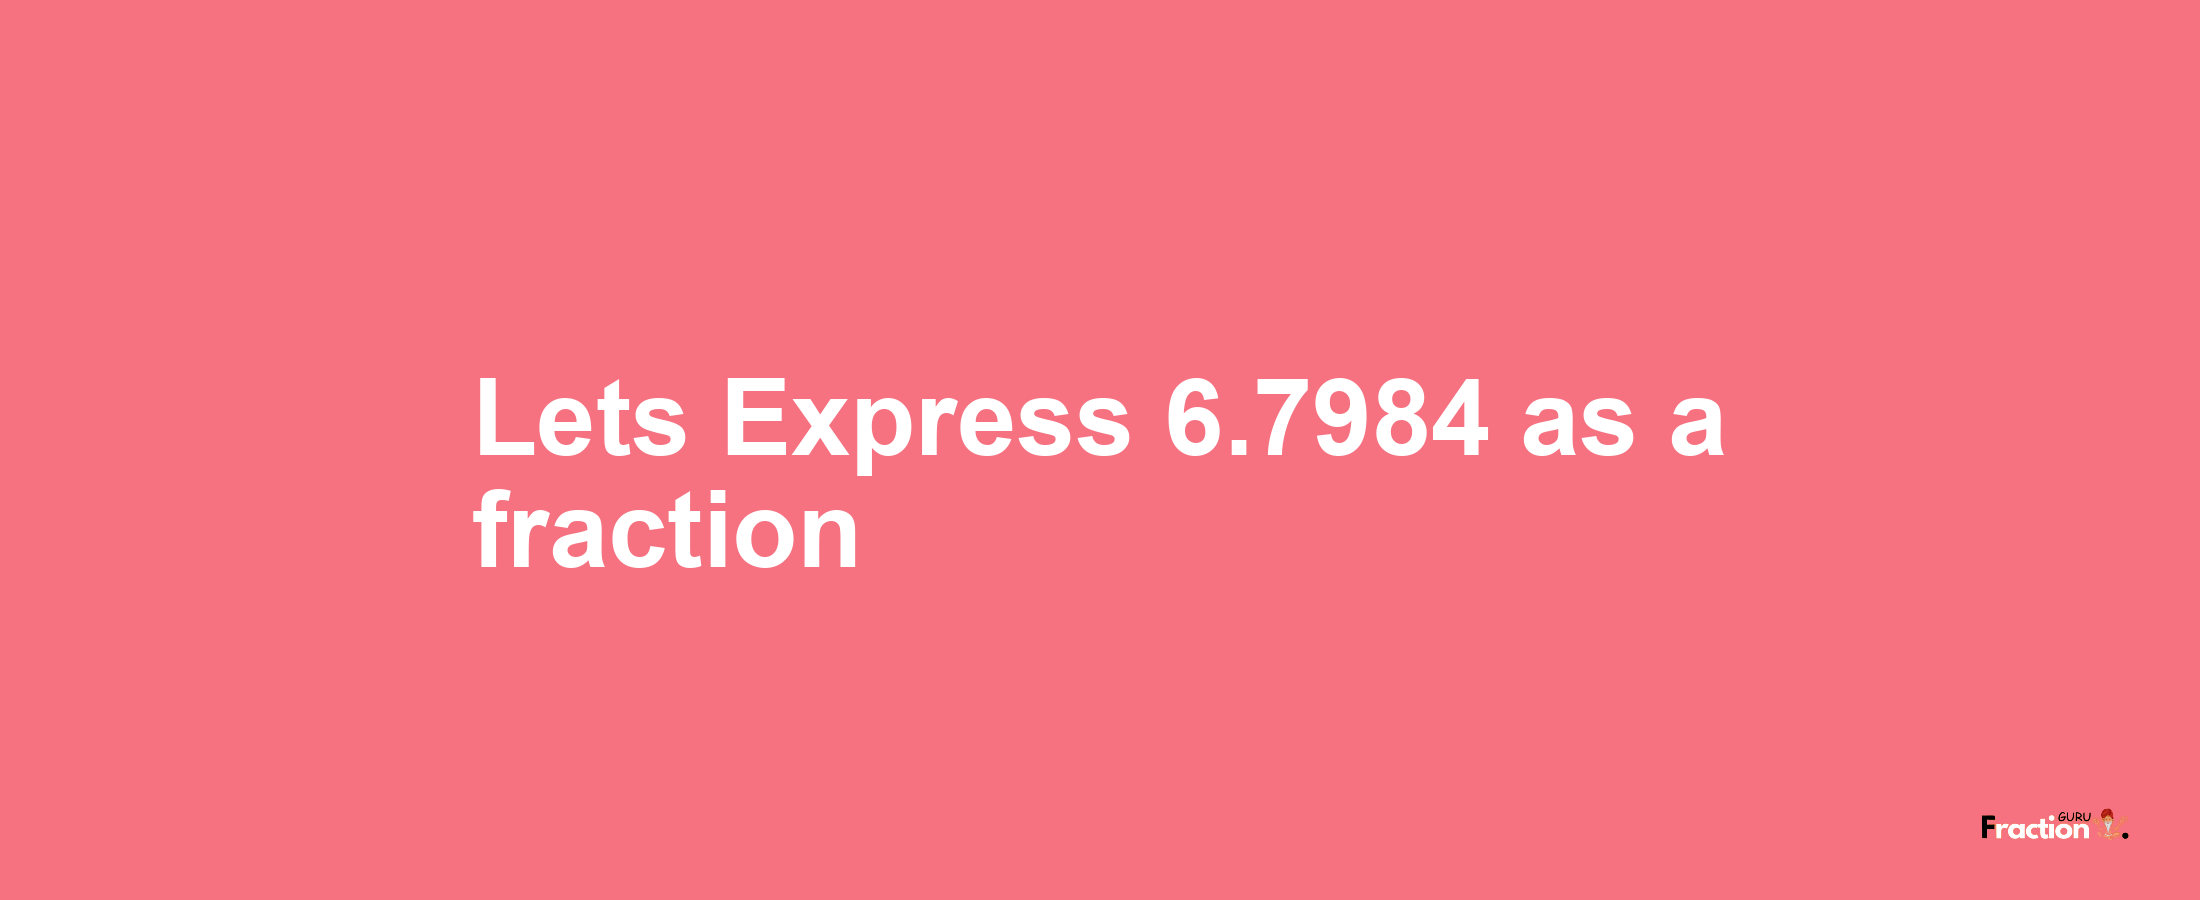 Lets Express 6.7984 as afraction